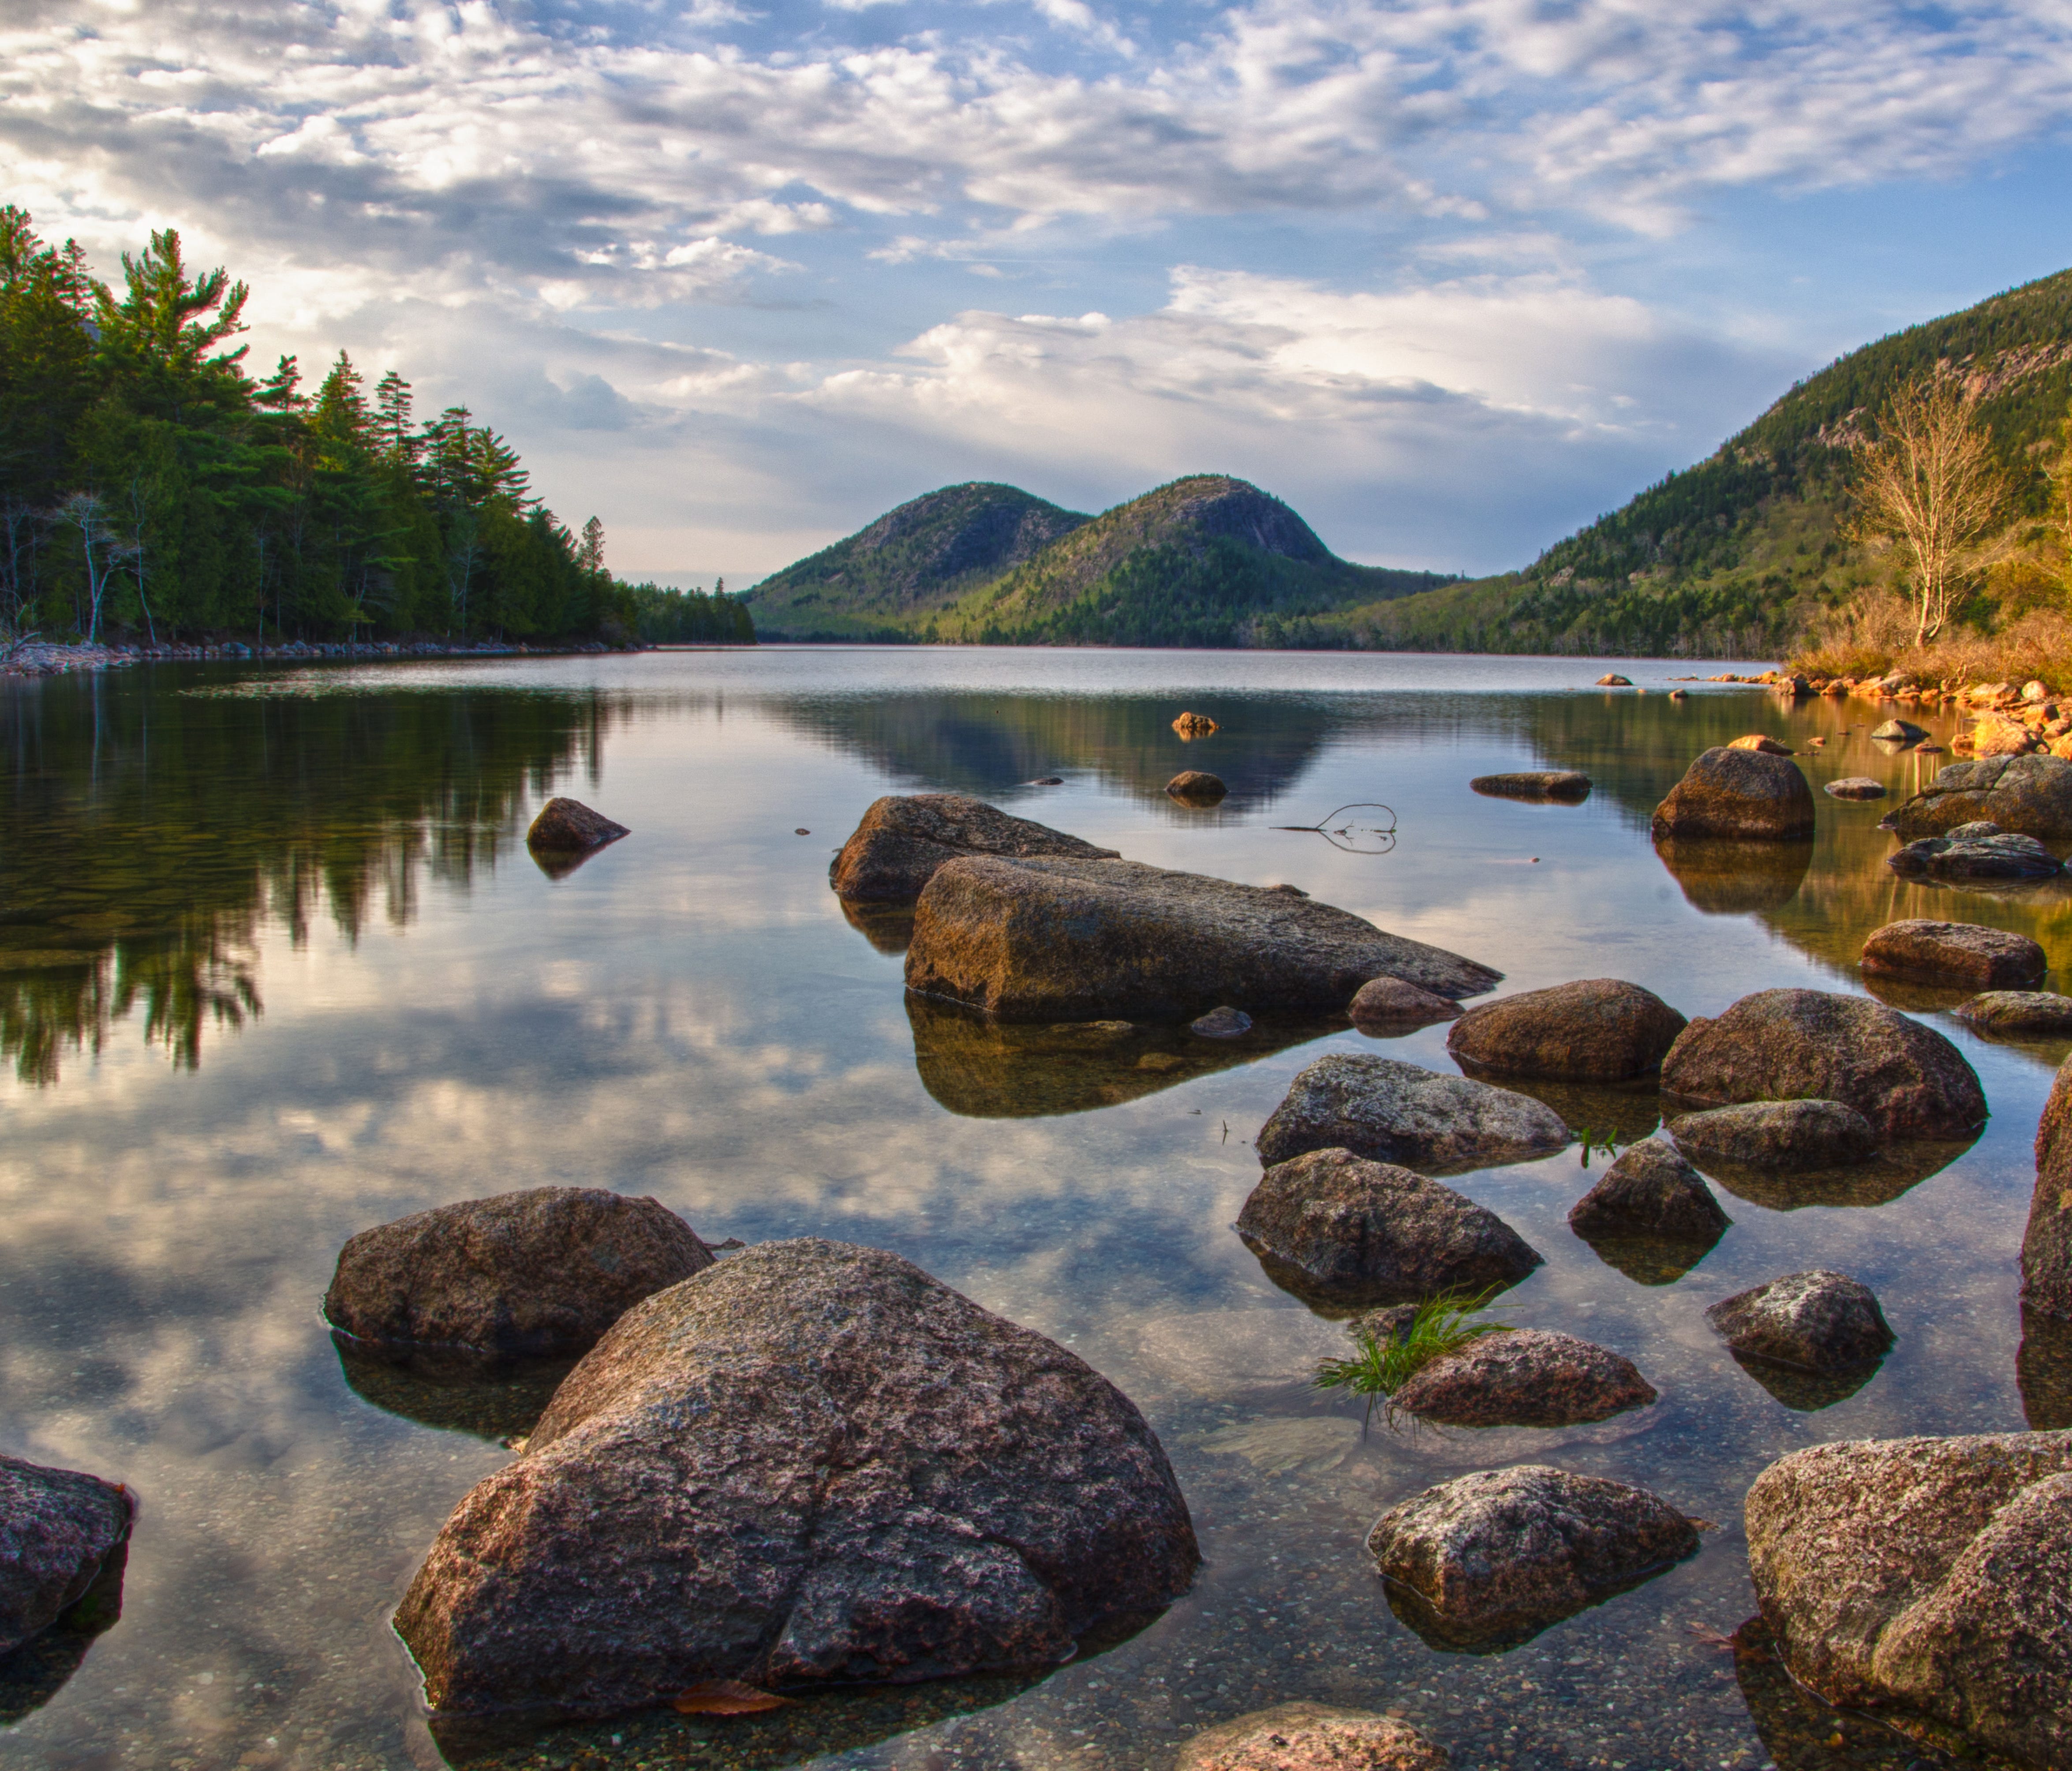 Tall trees and rolling mountains reflect in the still waters of Jordan Pond in Acadia National Park in Maine. Lakes and ponds add shimmering contrast to Acadia's forested and rocky landscape. Within or adjacent to the park, you can explore 14 great p